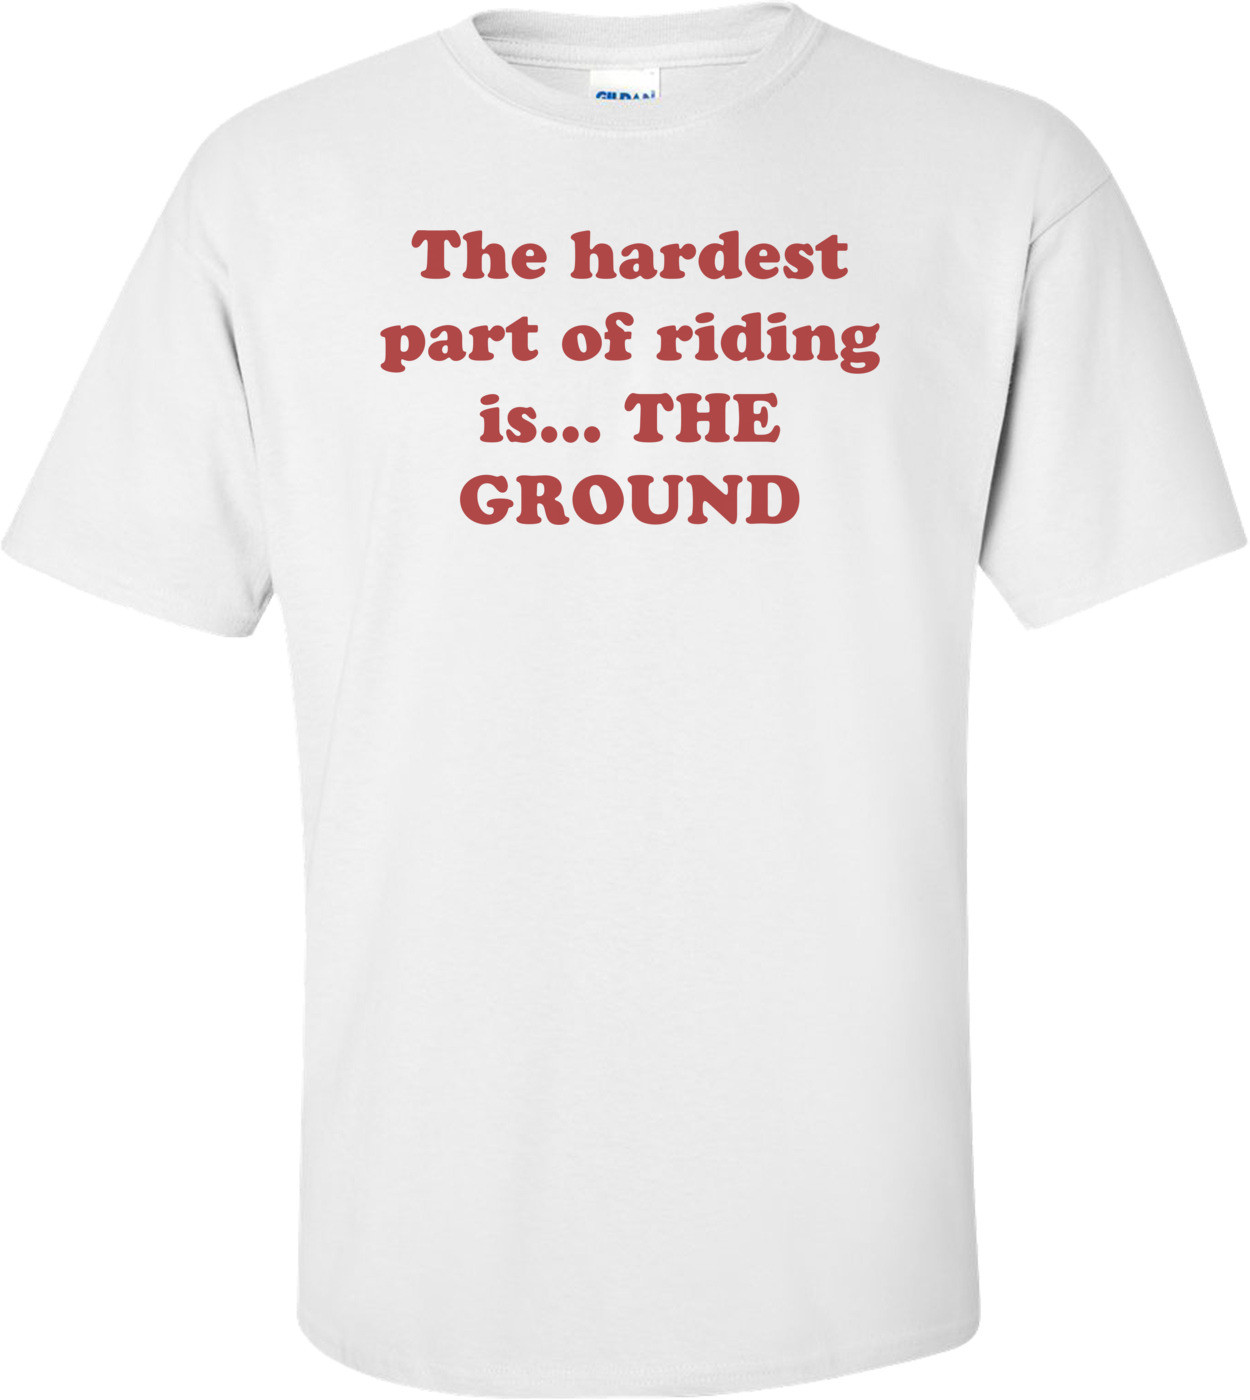 The hardest part of riding is... THE GROUND